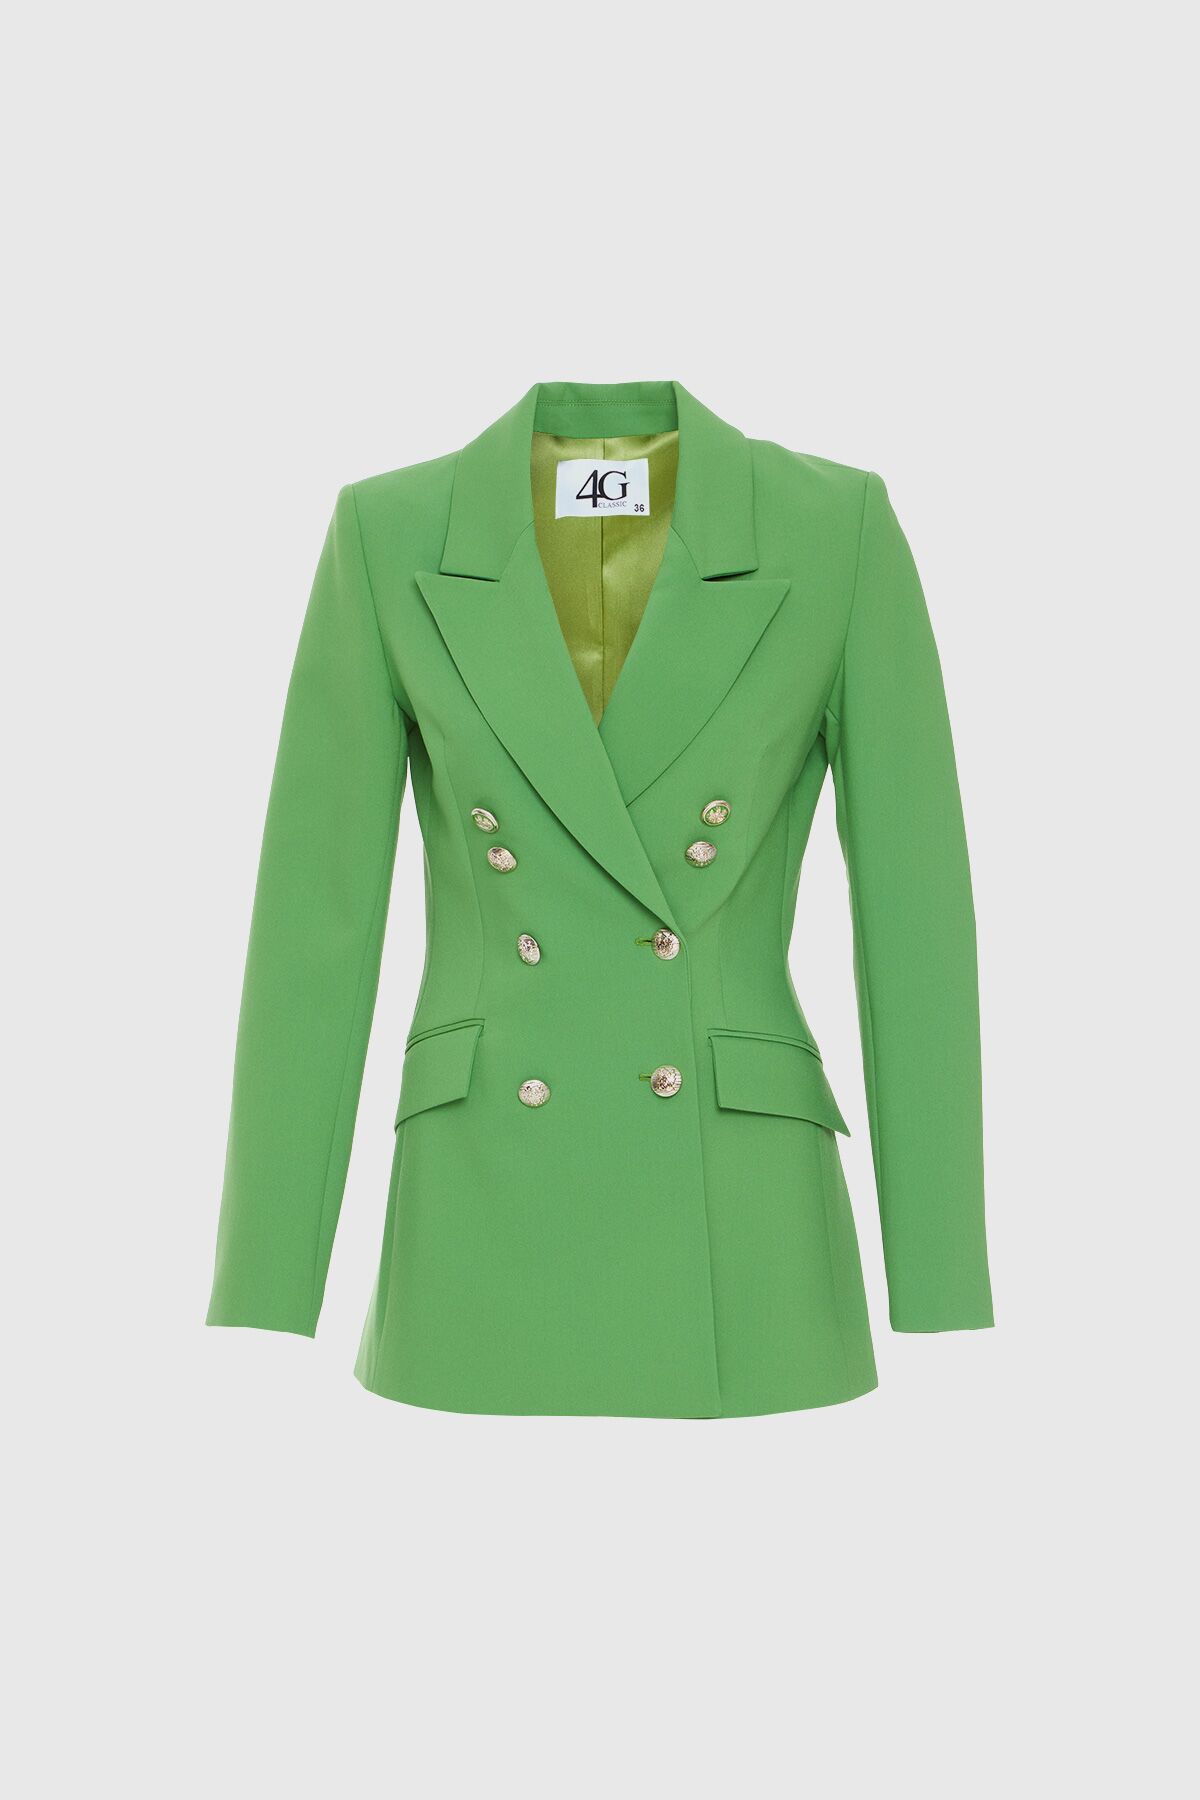 4G CLASSIC - Double Breasted Closure Gold Button Green Blazer Fit Jacket